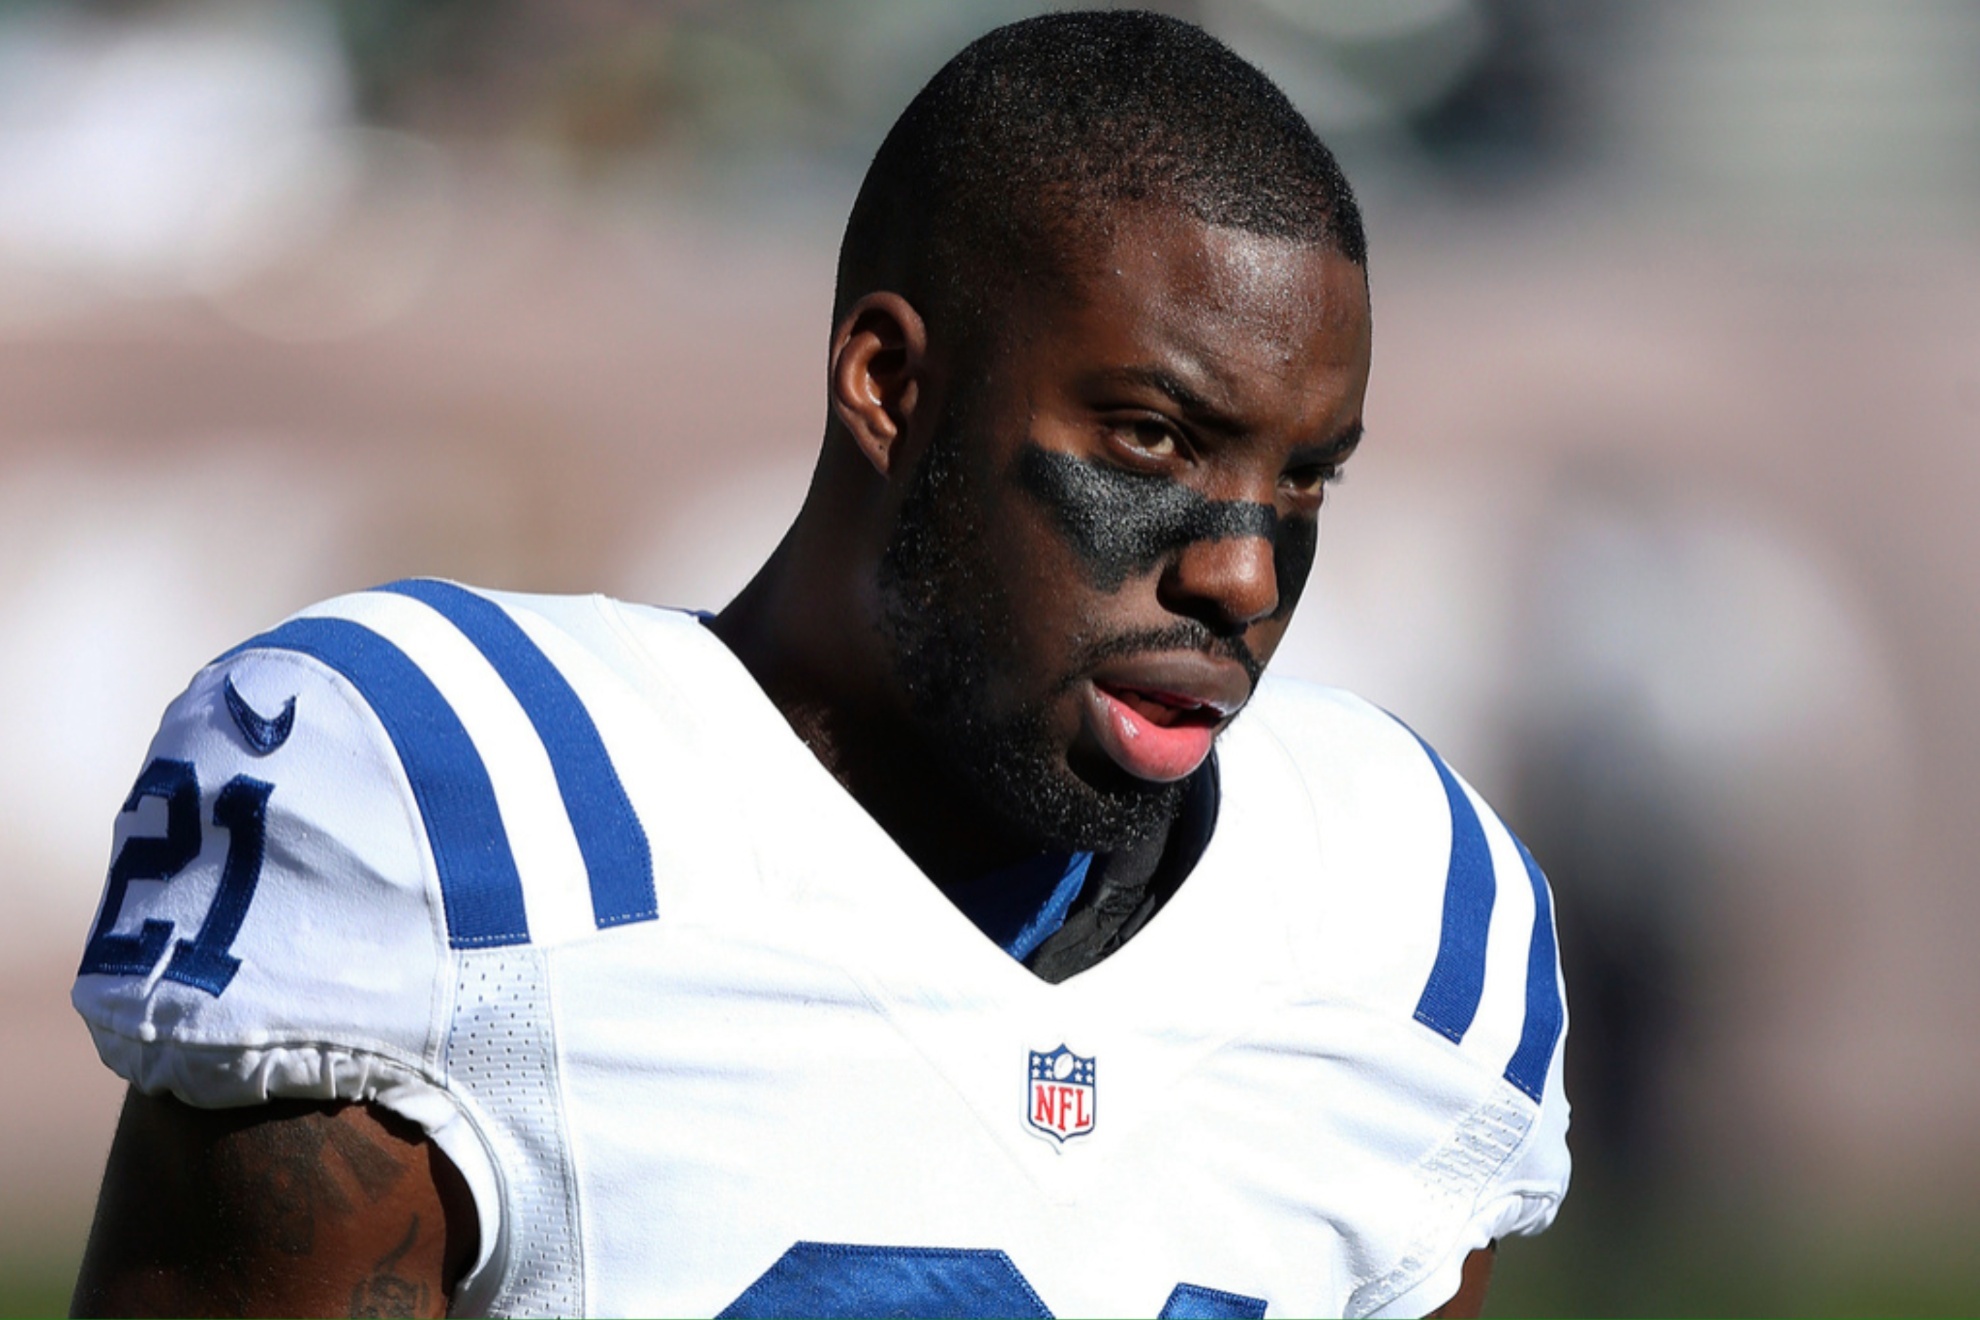 Police launched an investigation into the death of Vontae Davis.